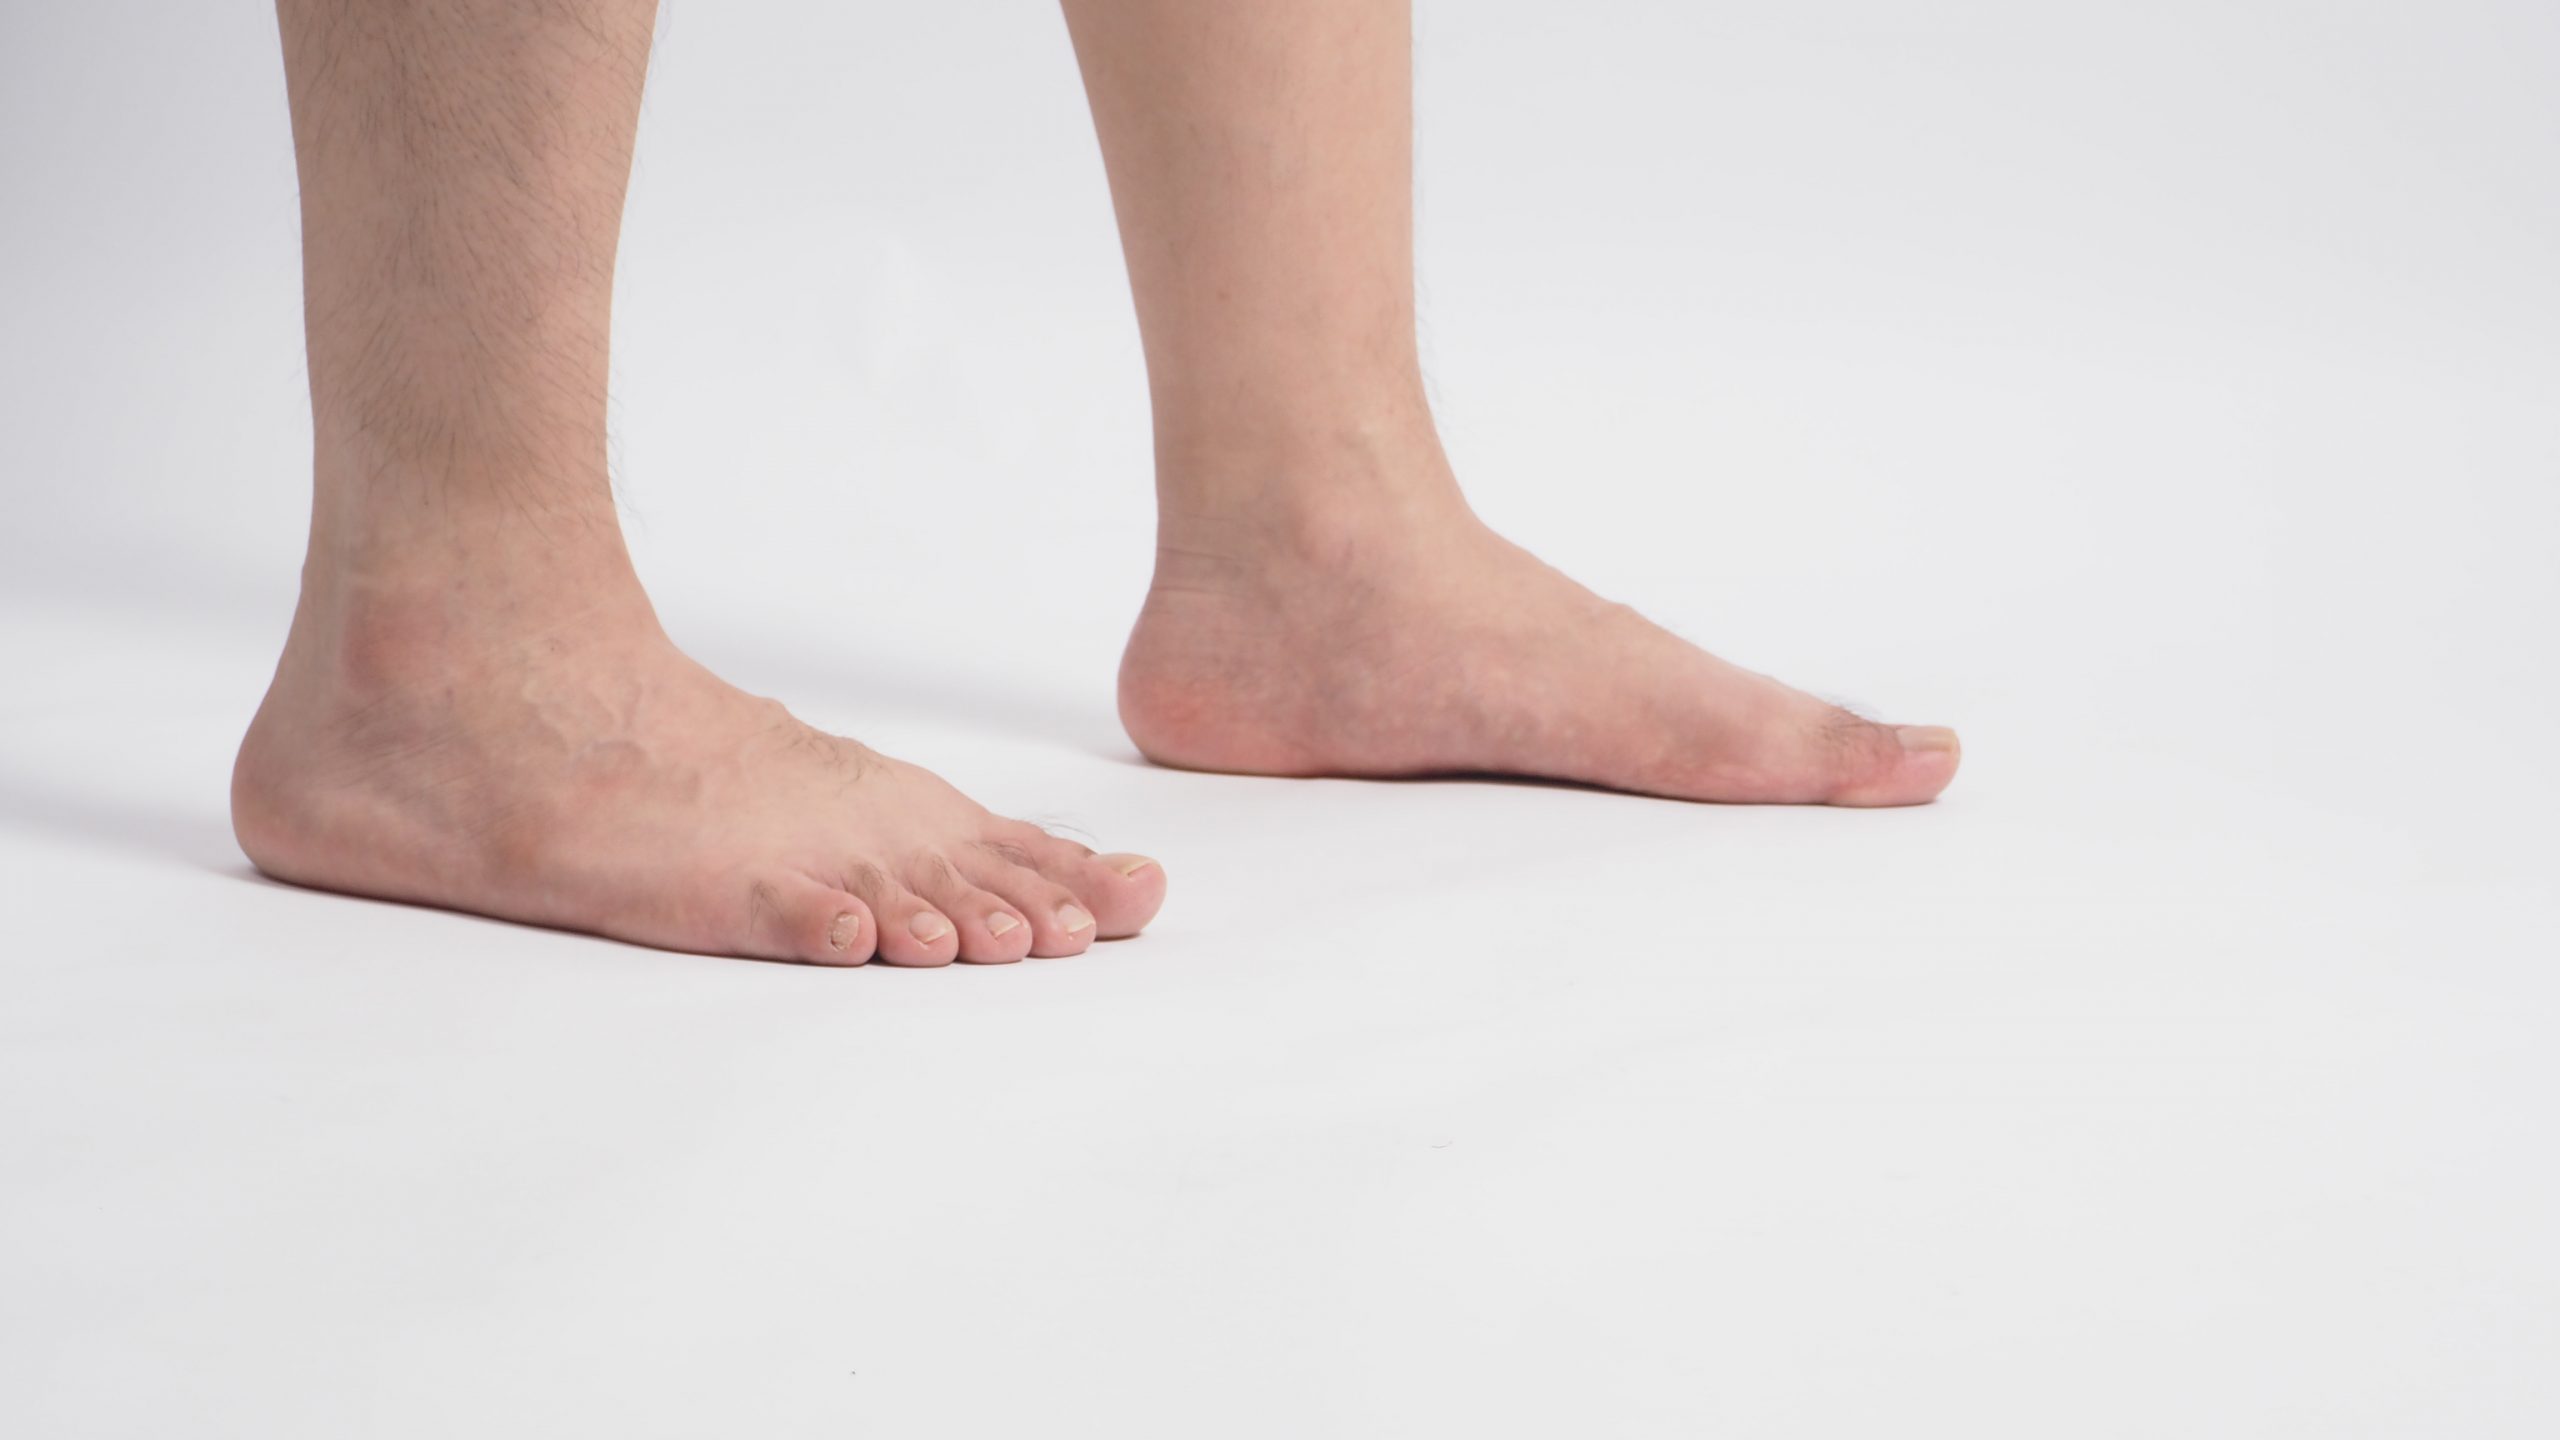 Flatfoot: causes, symptoms and treatments - PiedReseau